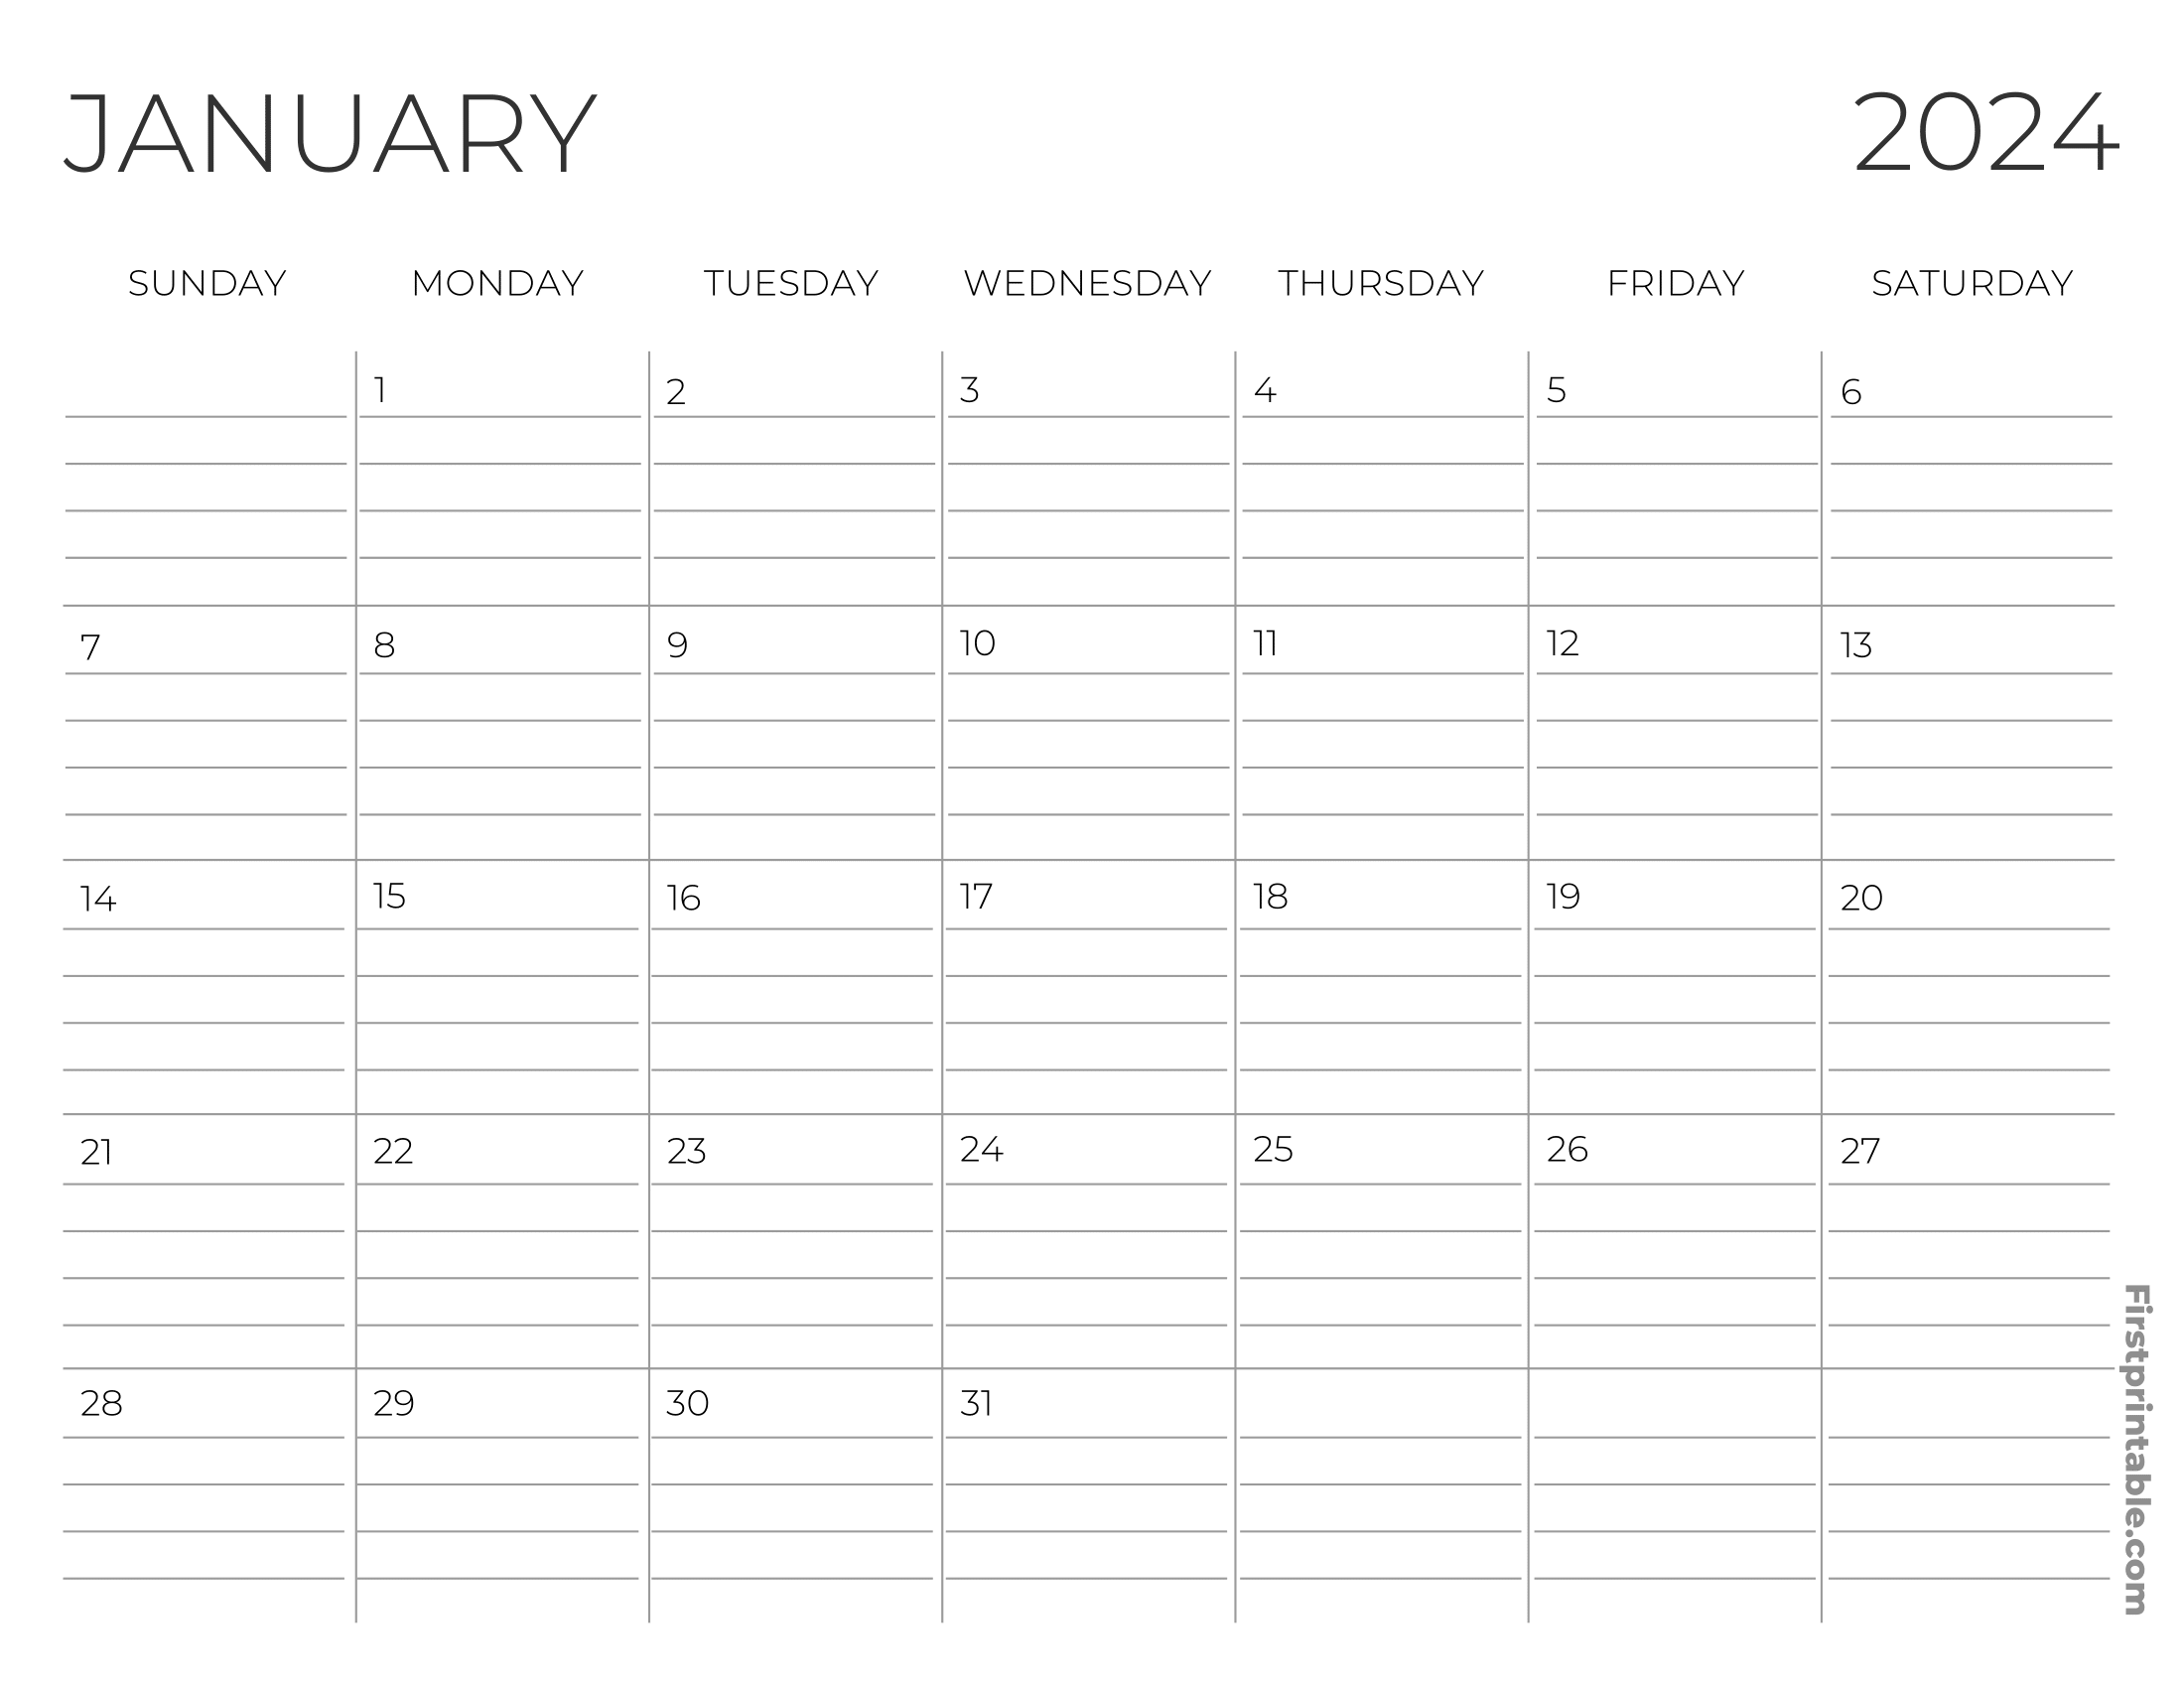 January Calendar 2024 with lines - Printable and Fillable